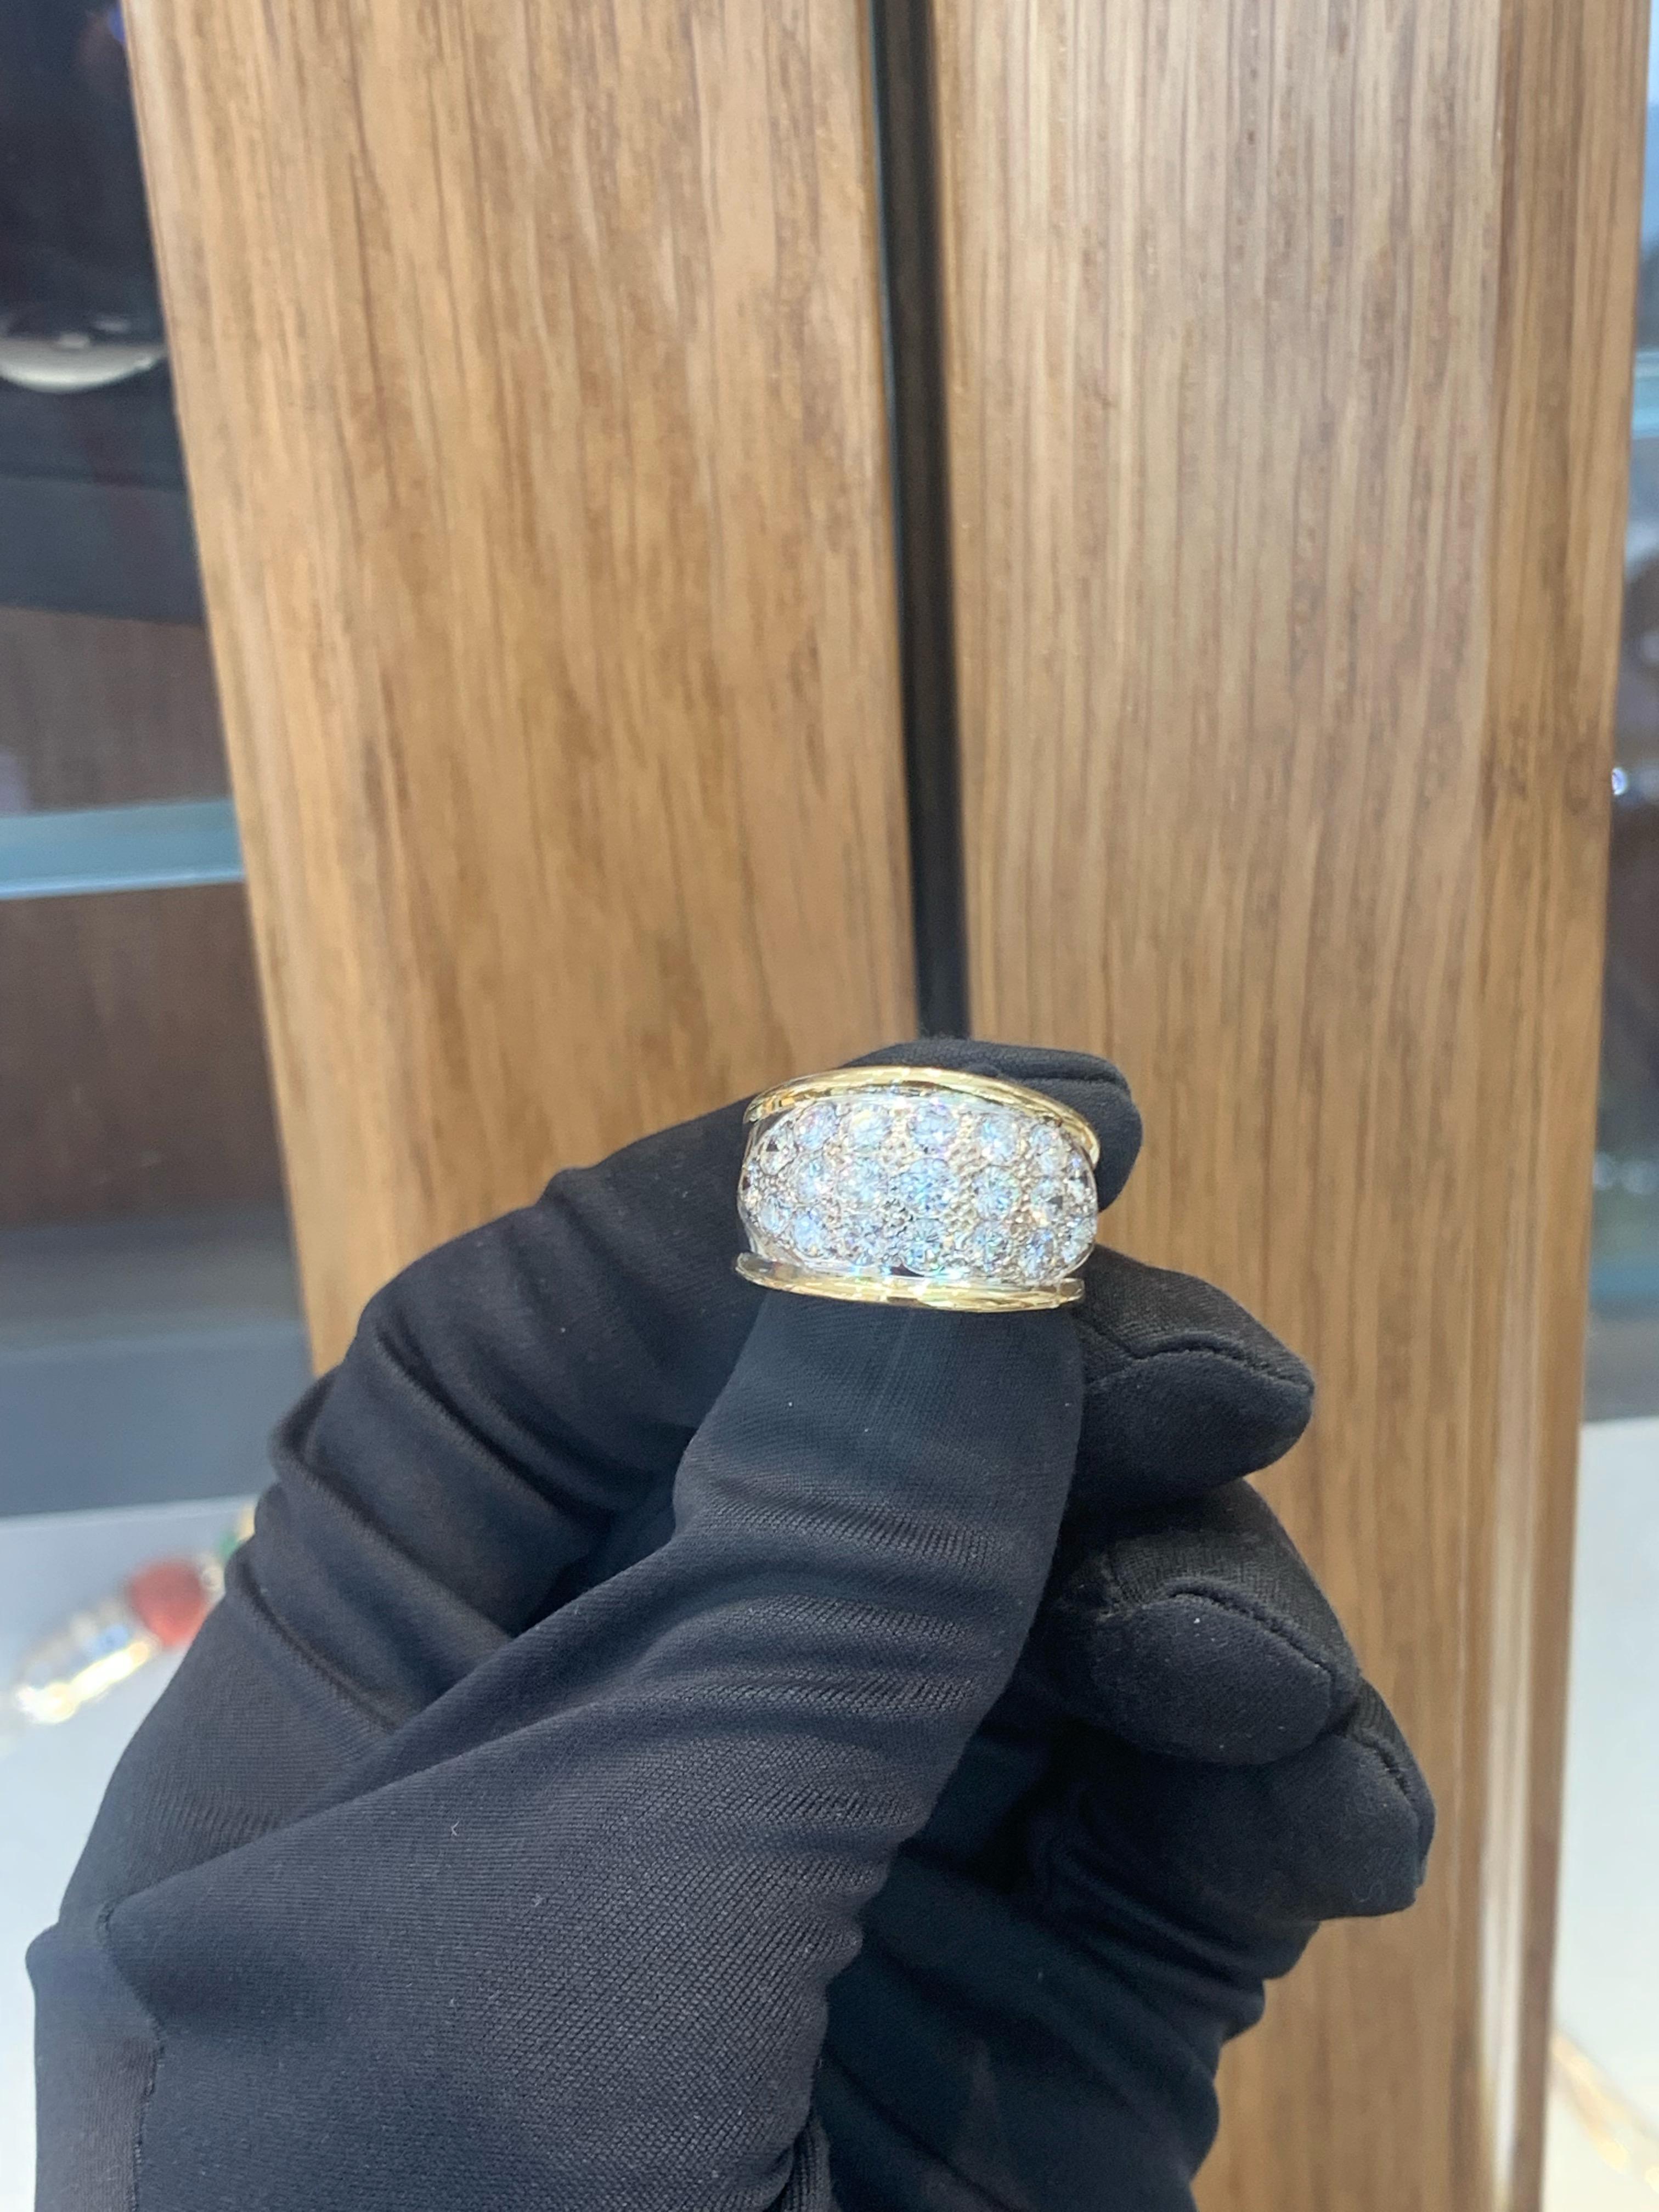 Beautifully Hand Crafted 18k Yellow Gold Diamond Ring.
Amazing Shine, Incredible Craftsmanship.
Great Statement Piece.
Approximately 1.50 Carats Of Diamonds.
Nice & Clean Goods. Large Stones.
Investment Piece.
Comfortable Fit On The Hand.
Looks